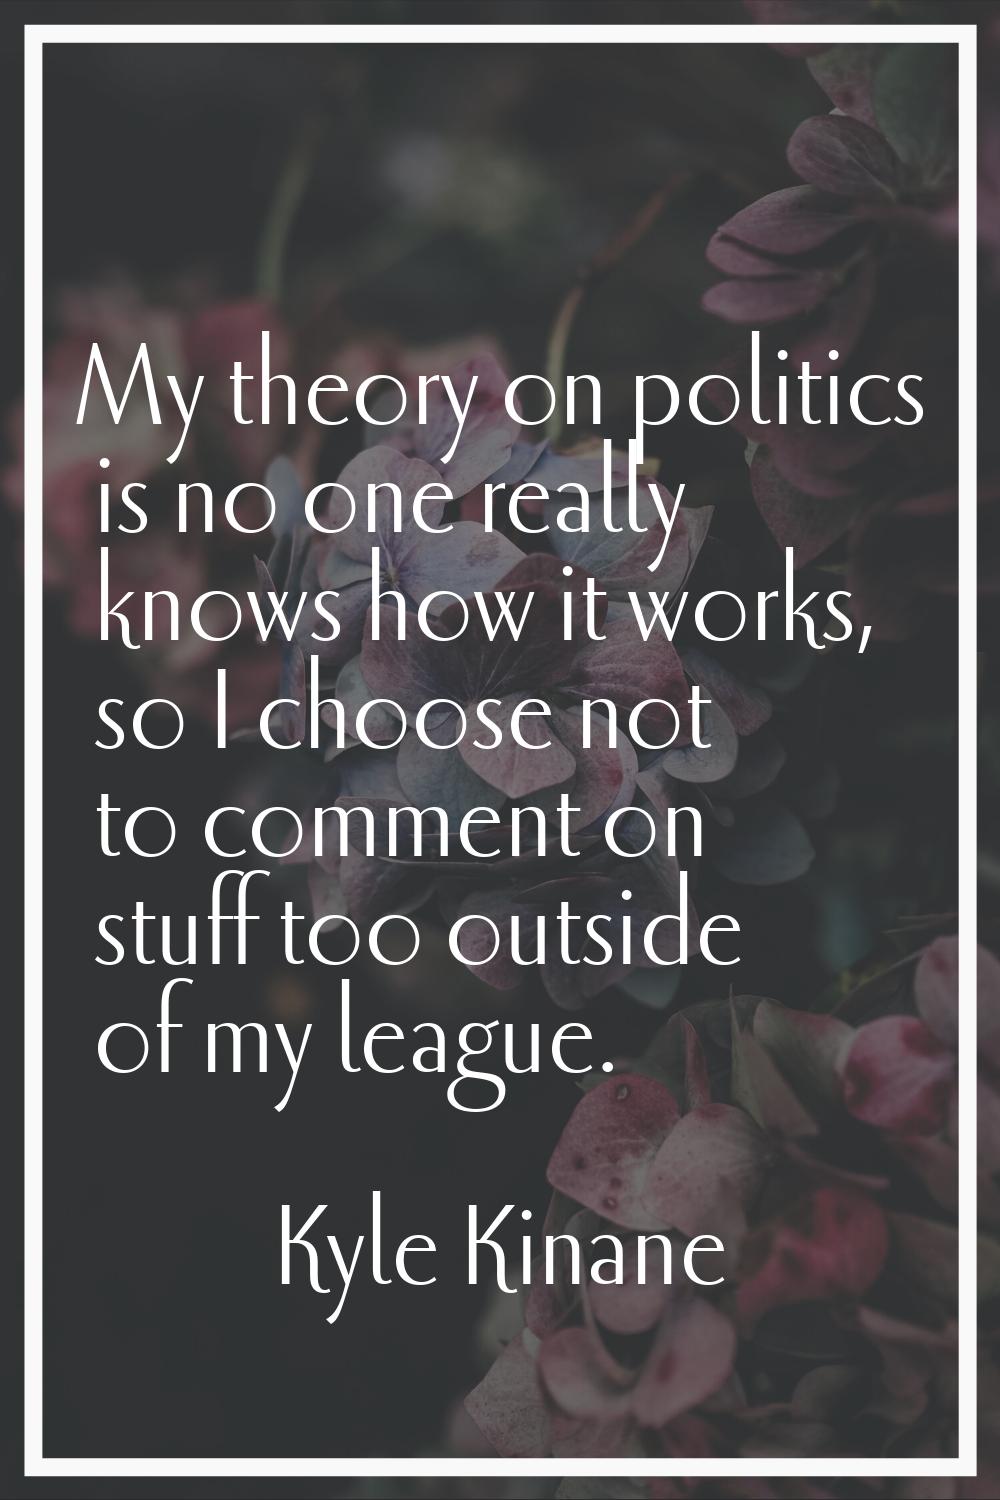 My theory on politics is no one really knows how it works, so I choose not to comment on stuff too 